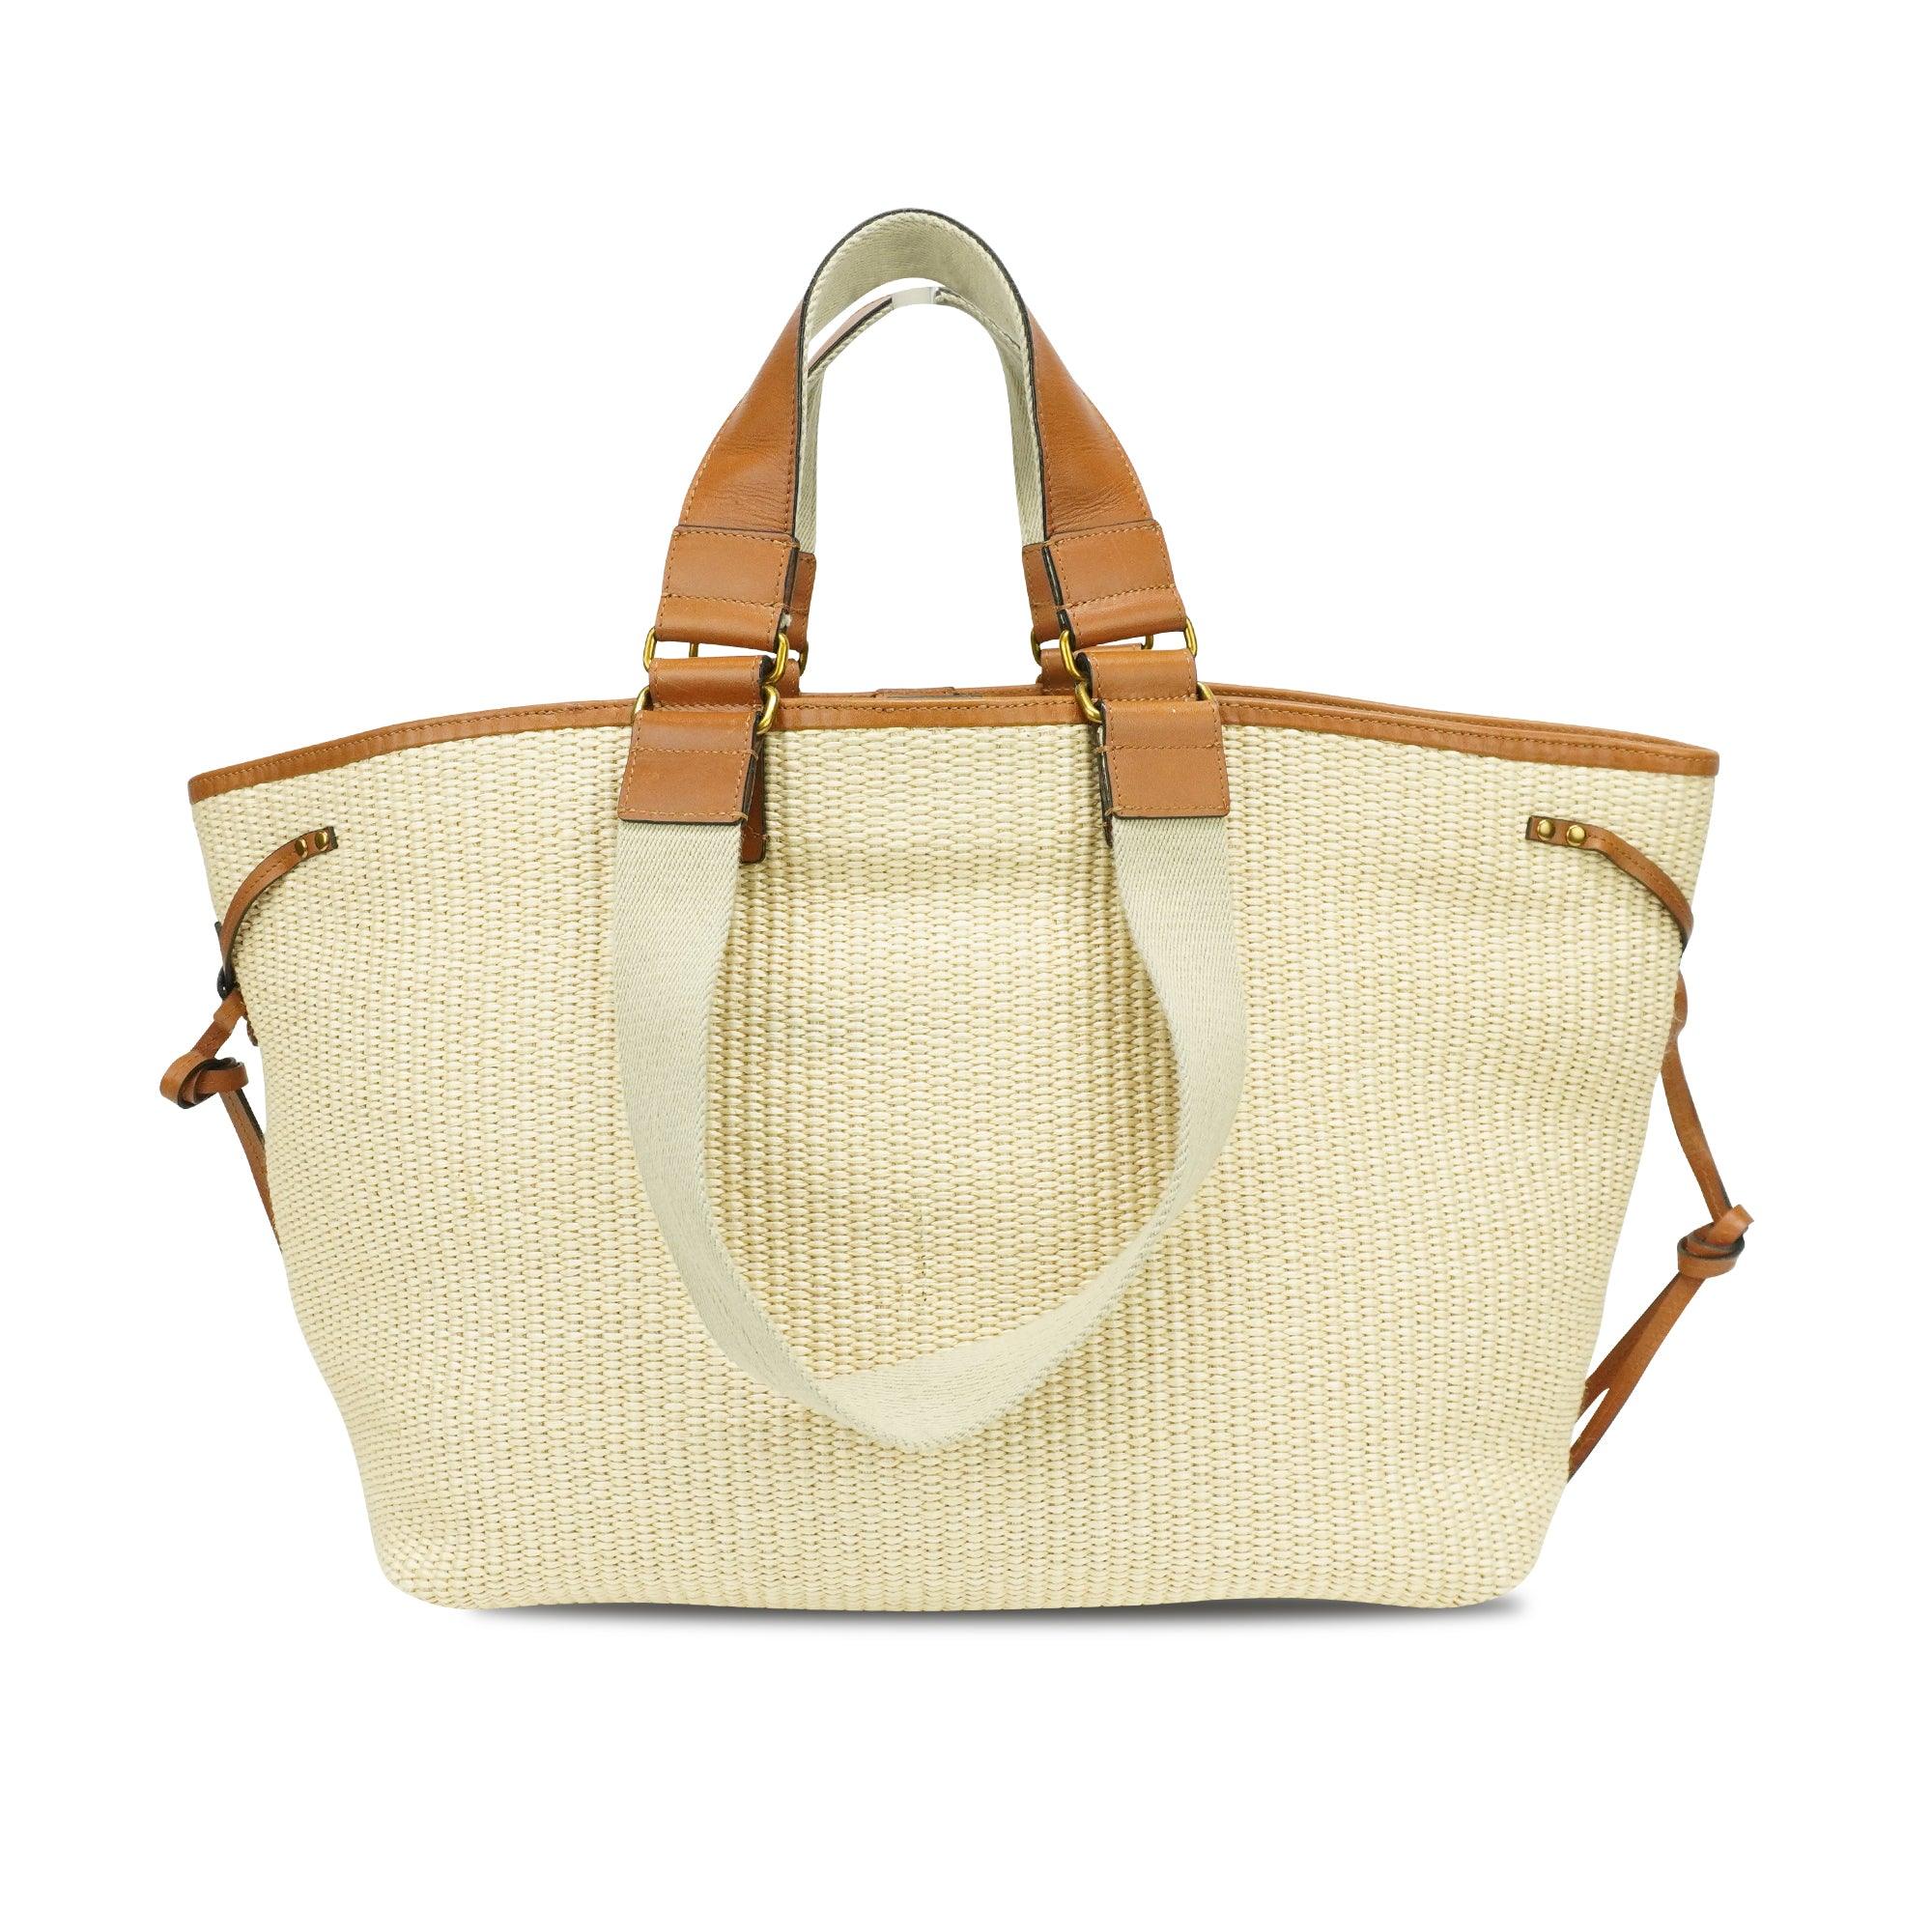 Isabel Marant Tote Bag - Fashionably Yours